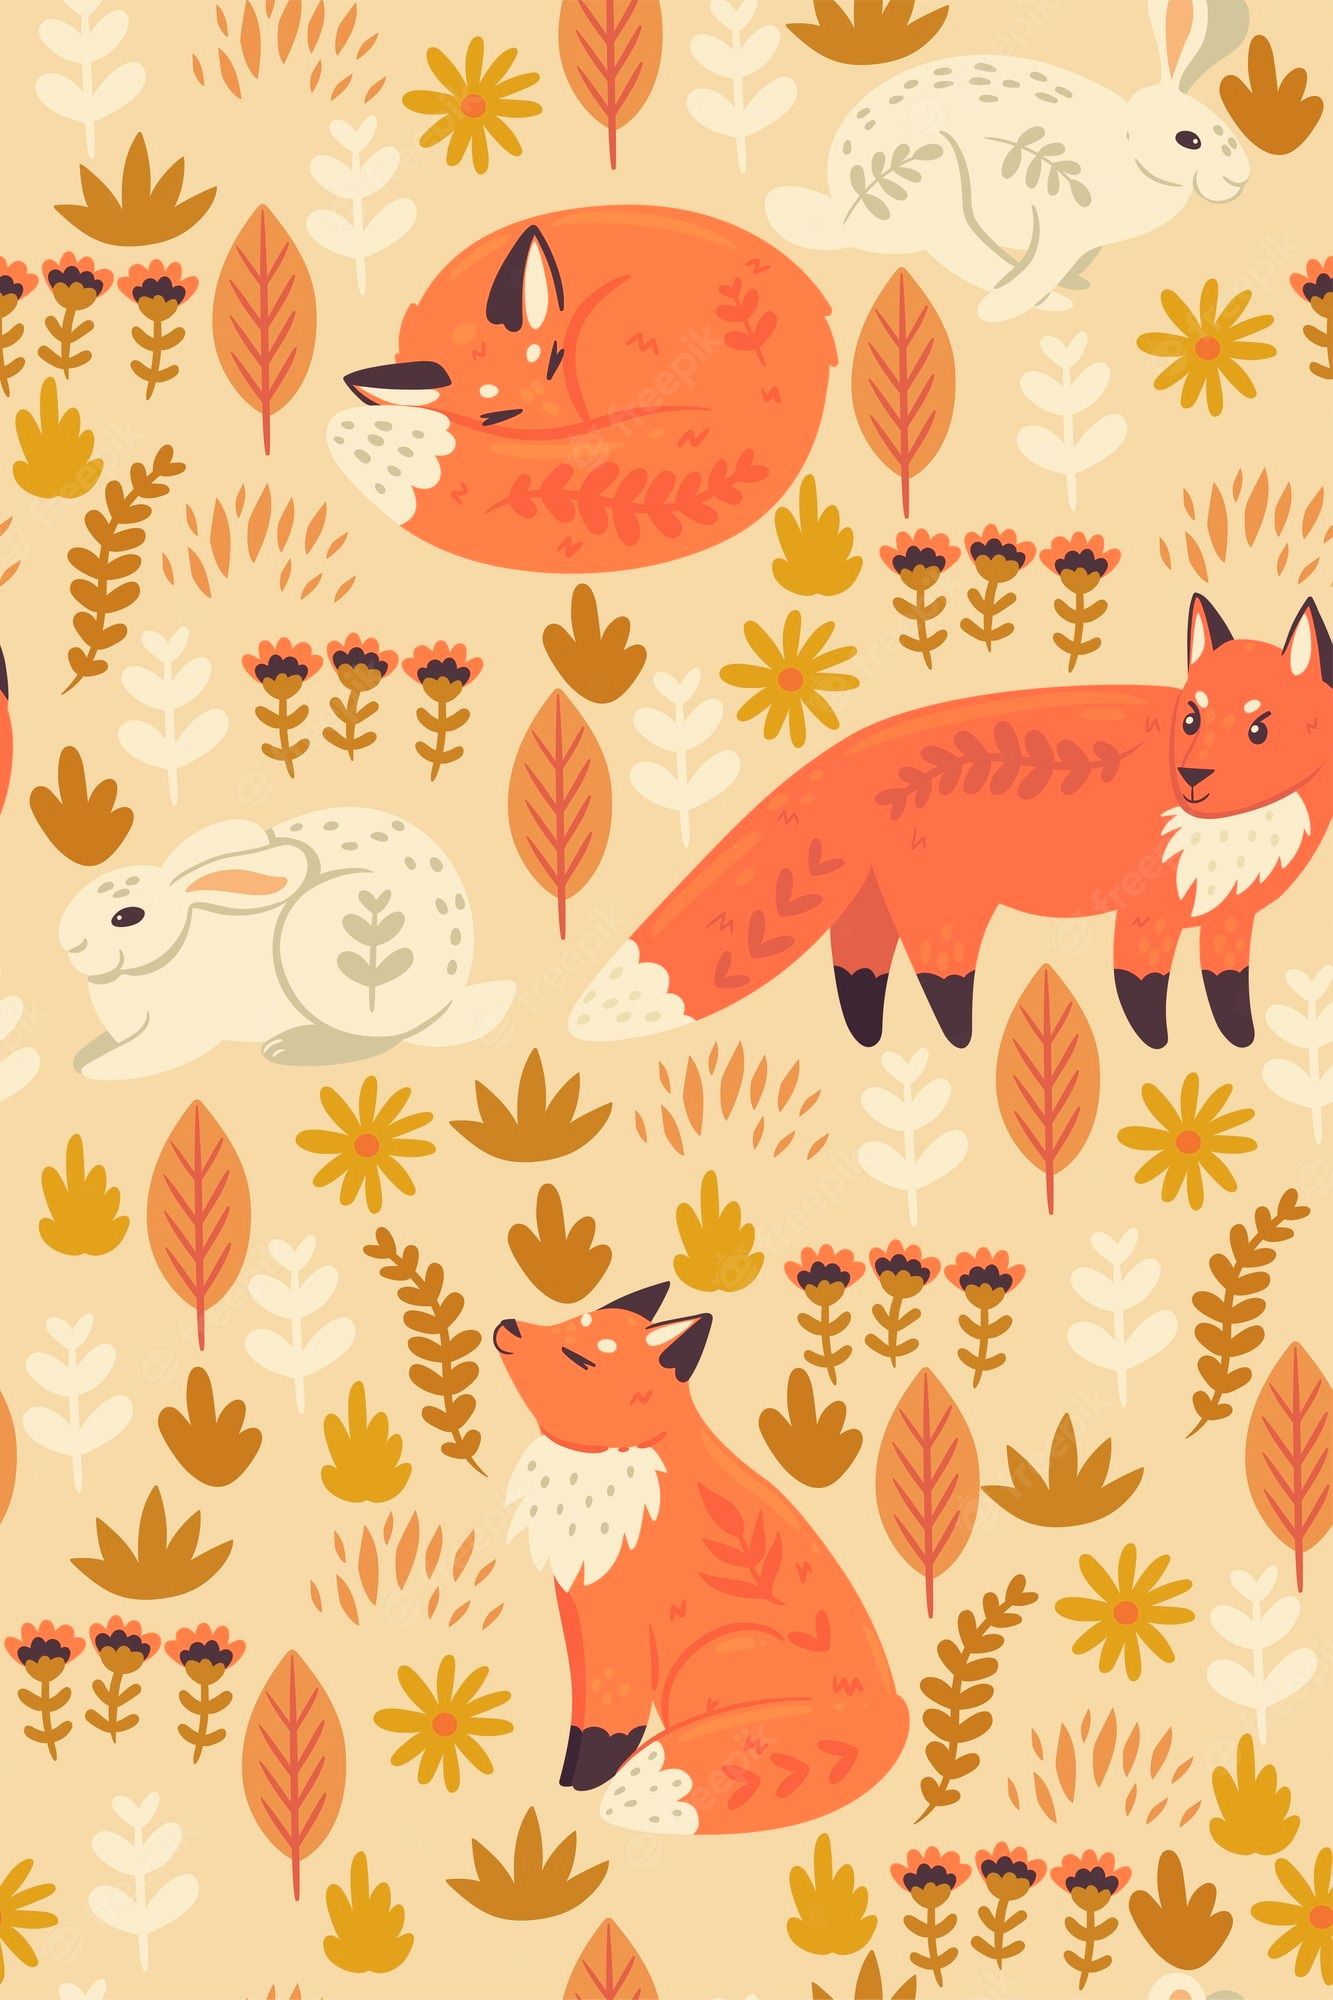 A pattern of foxes and rabbits in the forest - Fox